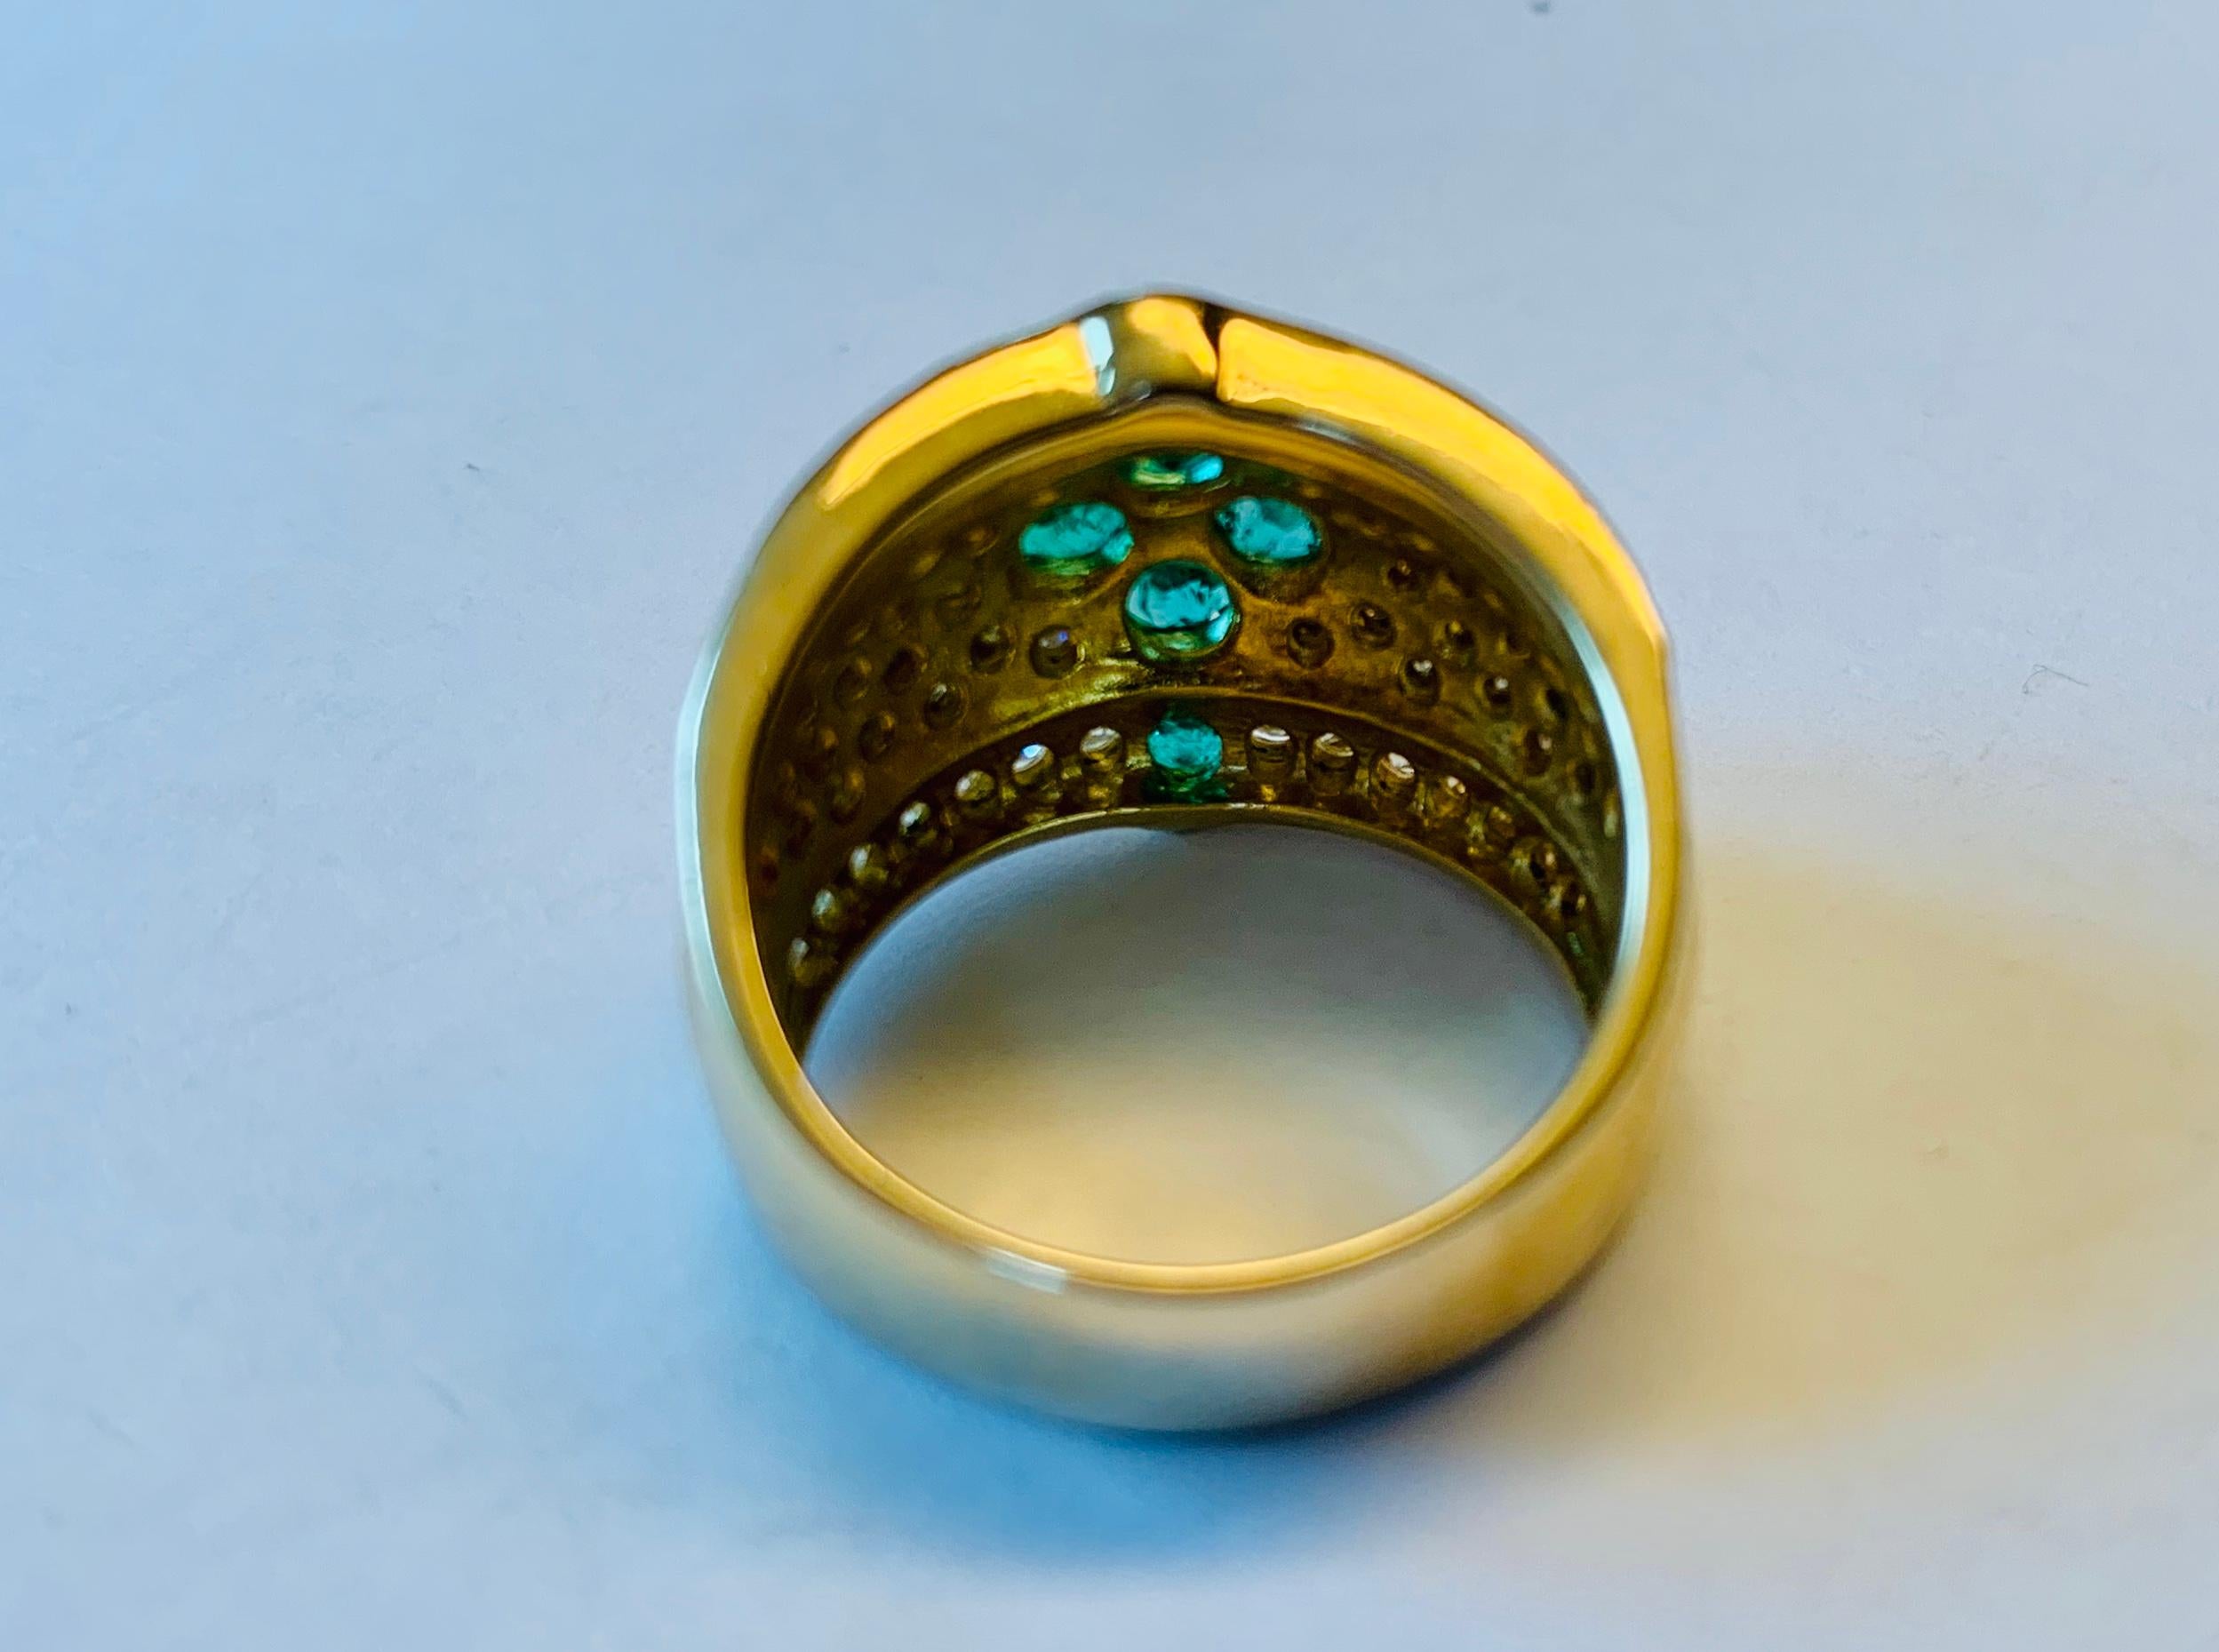 Very unusual and attractive 18 yellow Gold ring set with nice diamonds weighing approximately 1.06 ct and vivid green emealds weighing approximately 1.01 ct. 

The ring is currently size 52/12 but can be resized larger or smaller if necessary.
